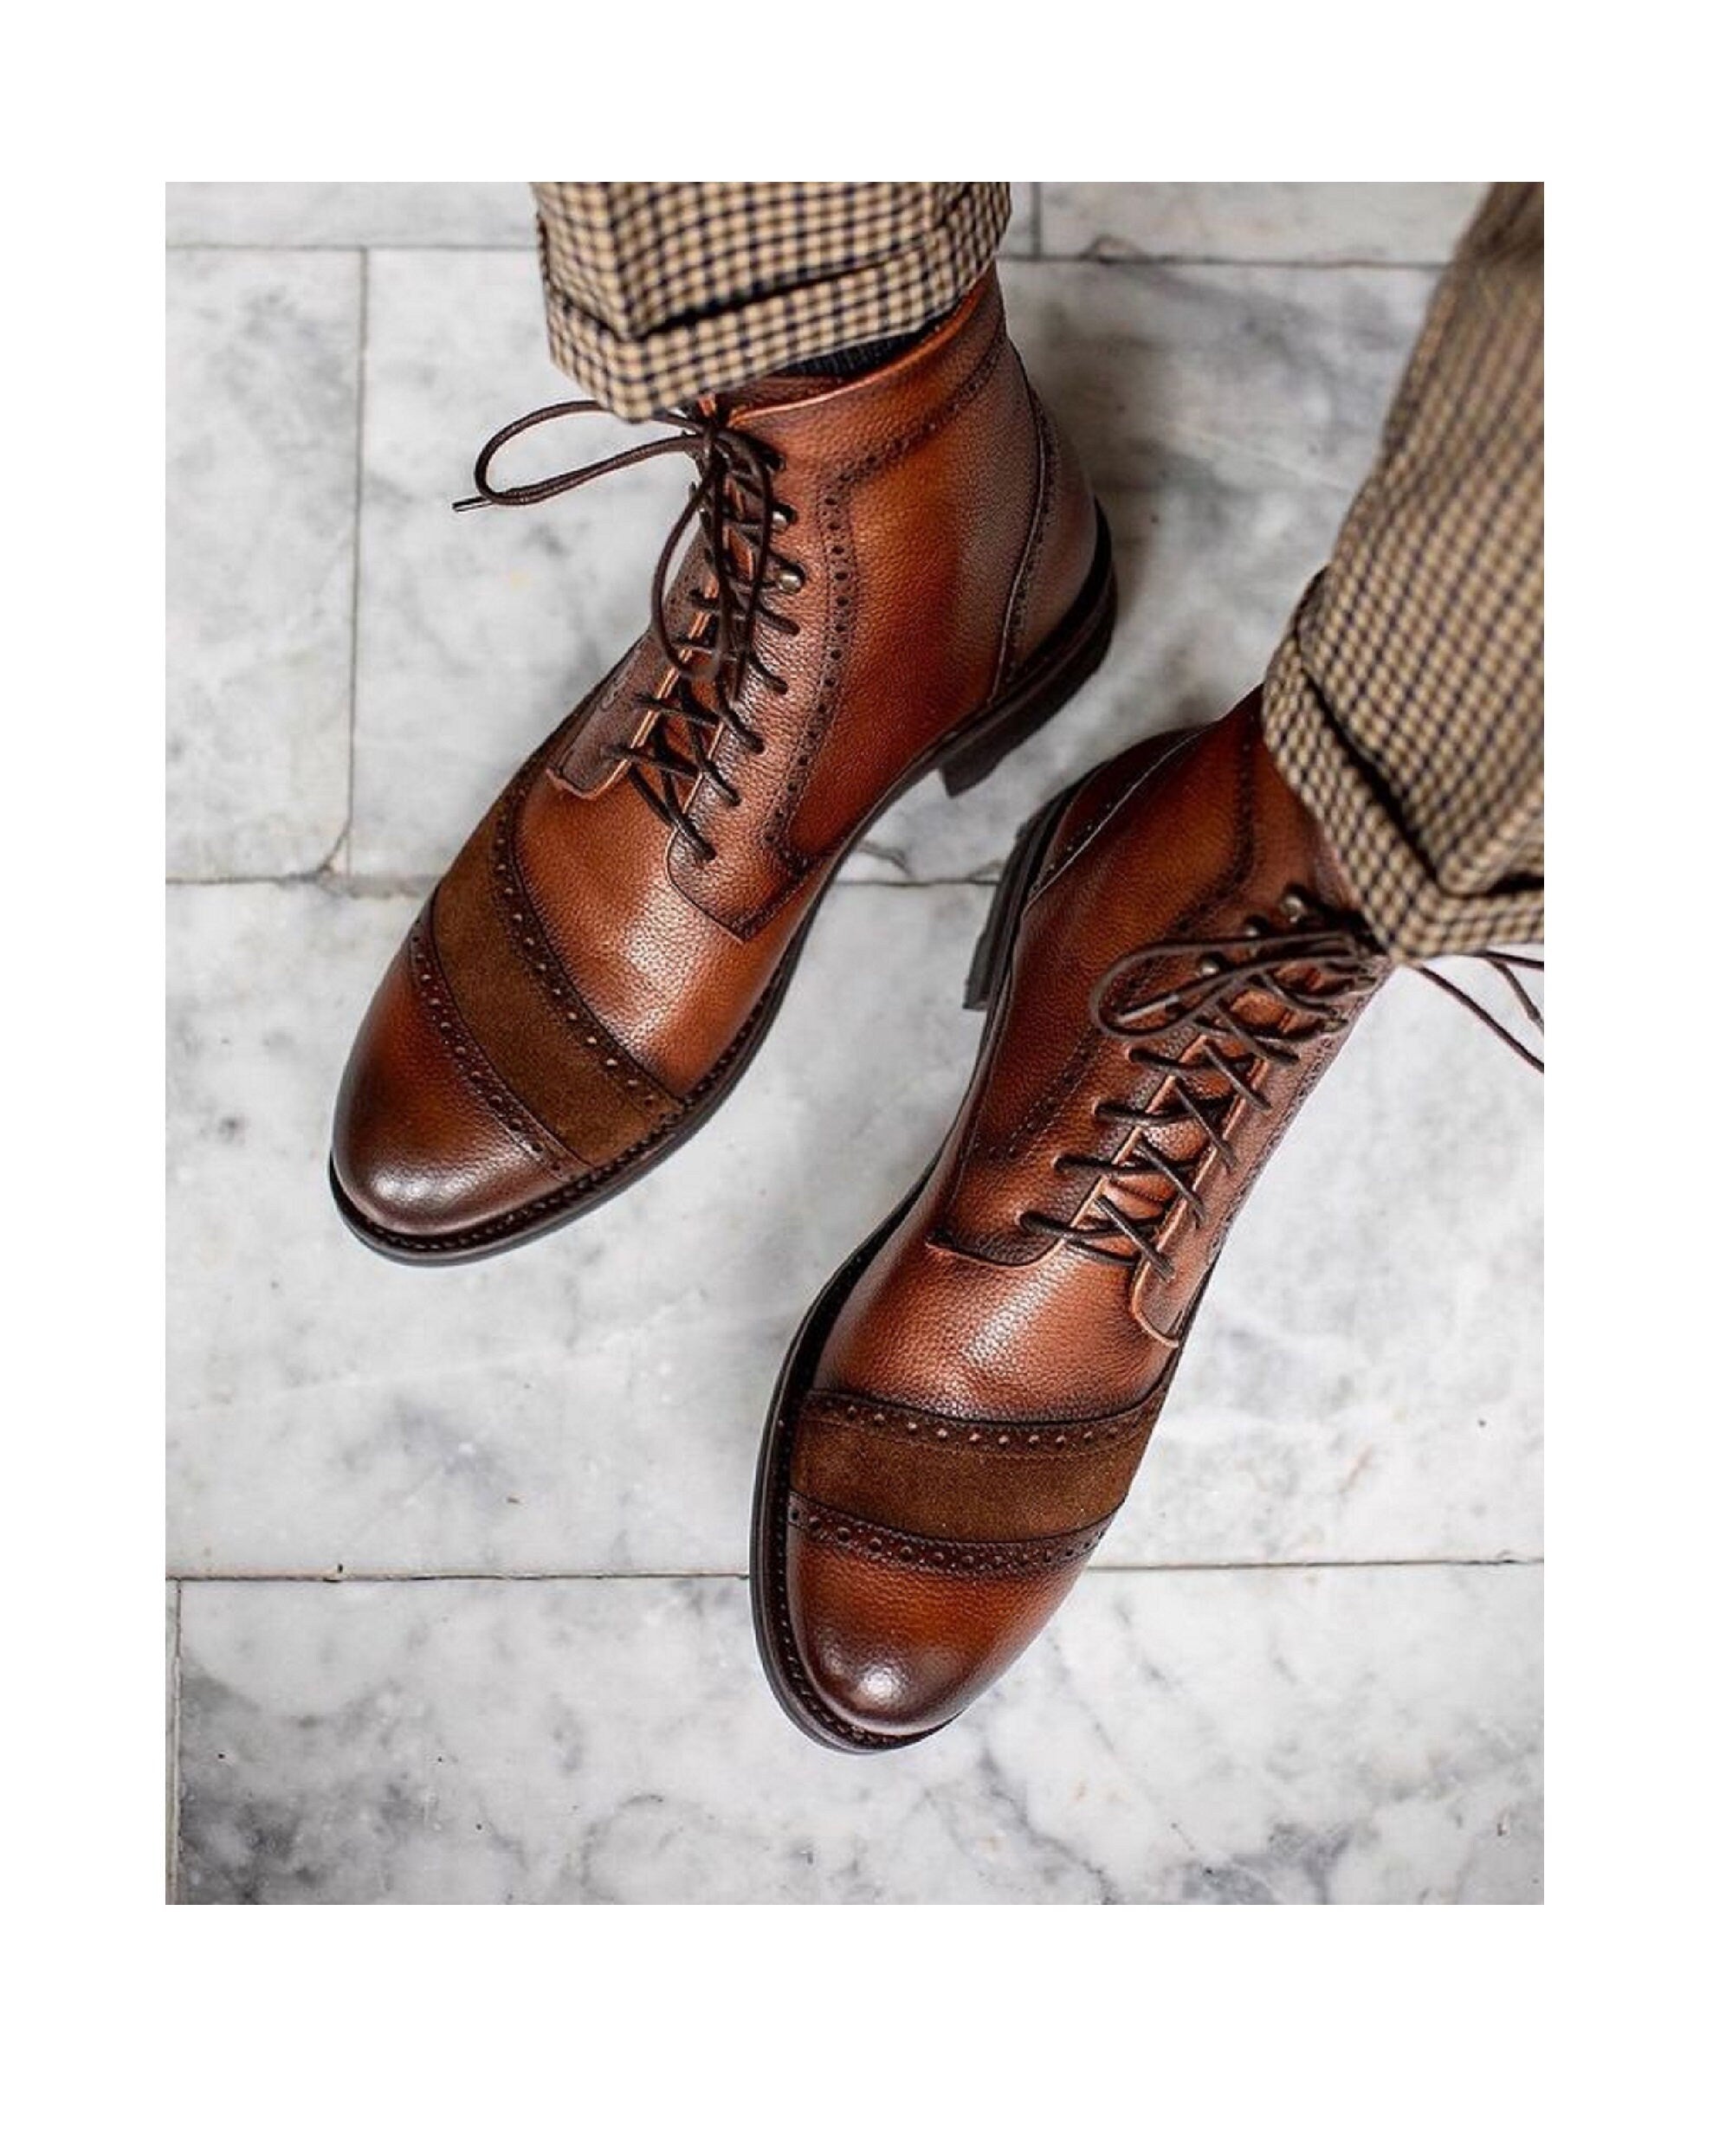 New Men's Handmade Brown Color Leather & Suede Luxury Men's Stylish Cap Toe Dress Fashion Ankle Boots